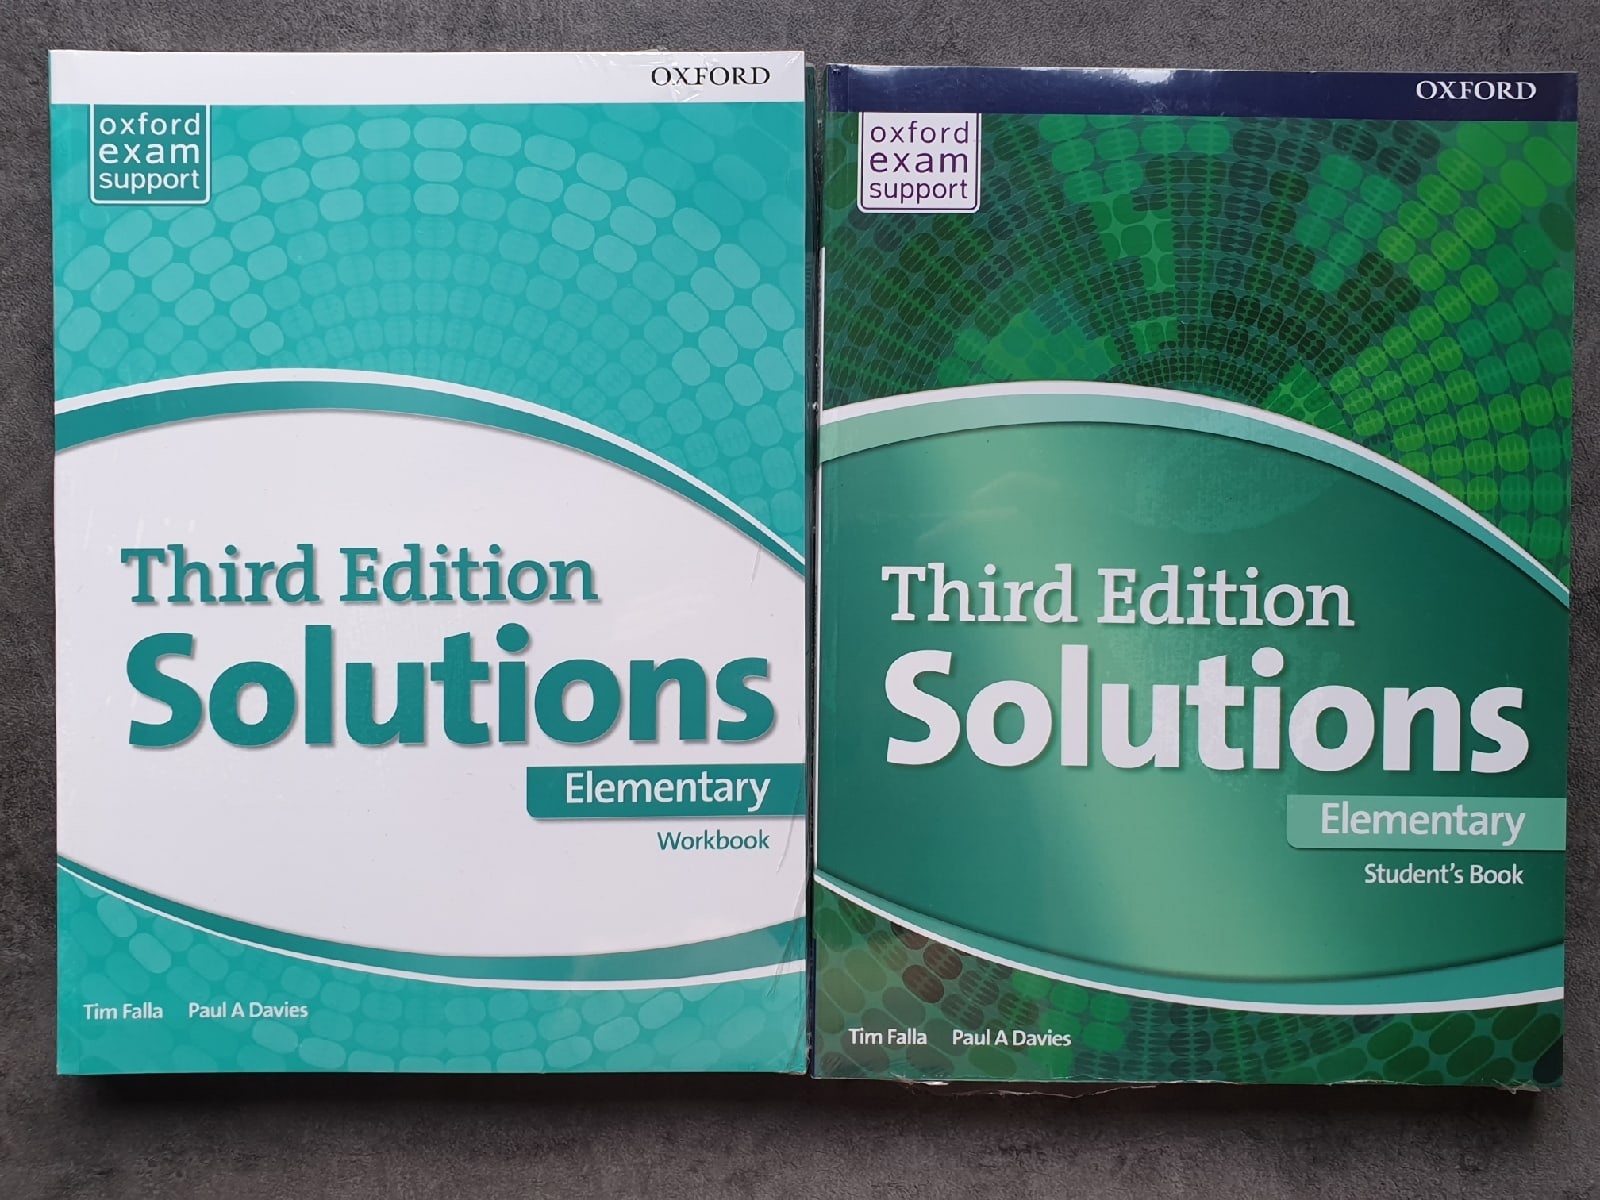 Solutions elementary 6 класс. Учебник solutions Elementary. Solutions Elementary: Workbook. Third Edition solutions. Учебник third Edition solutions Elementary.